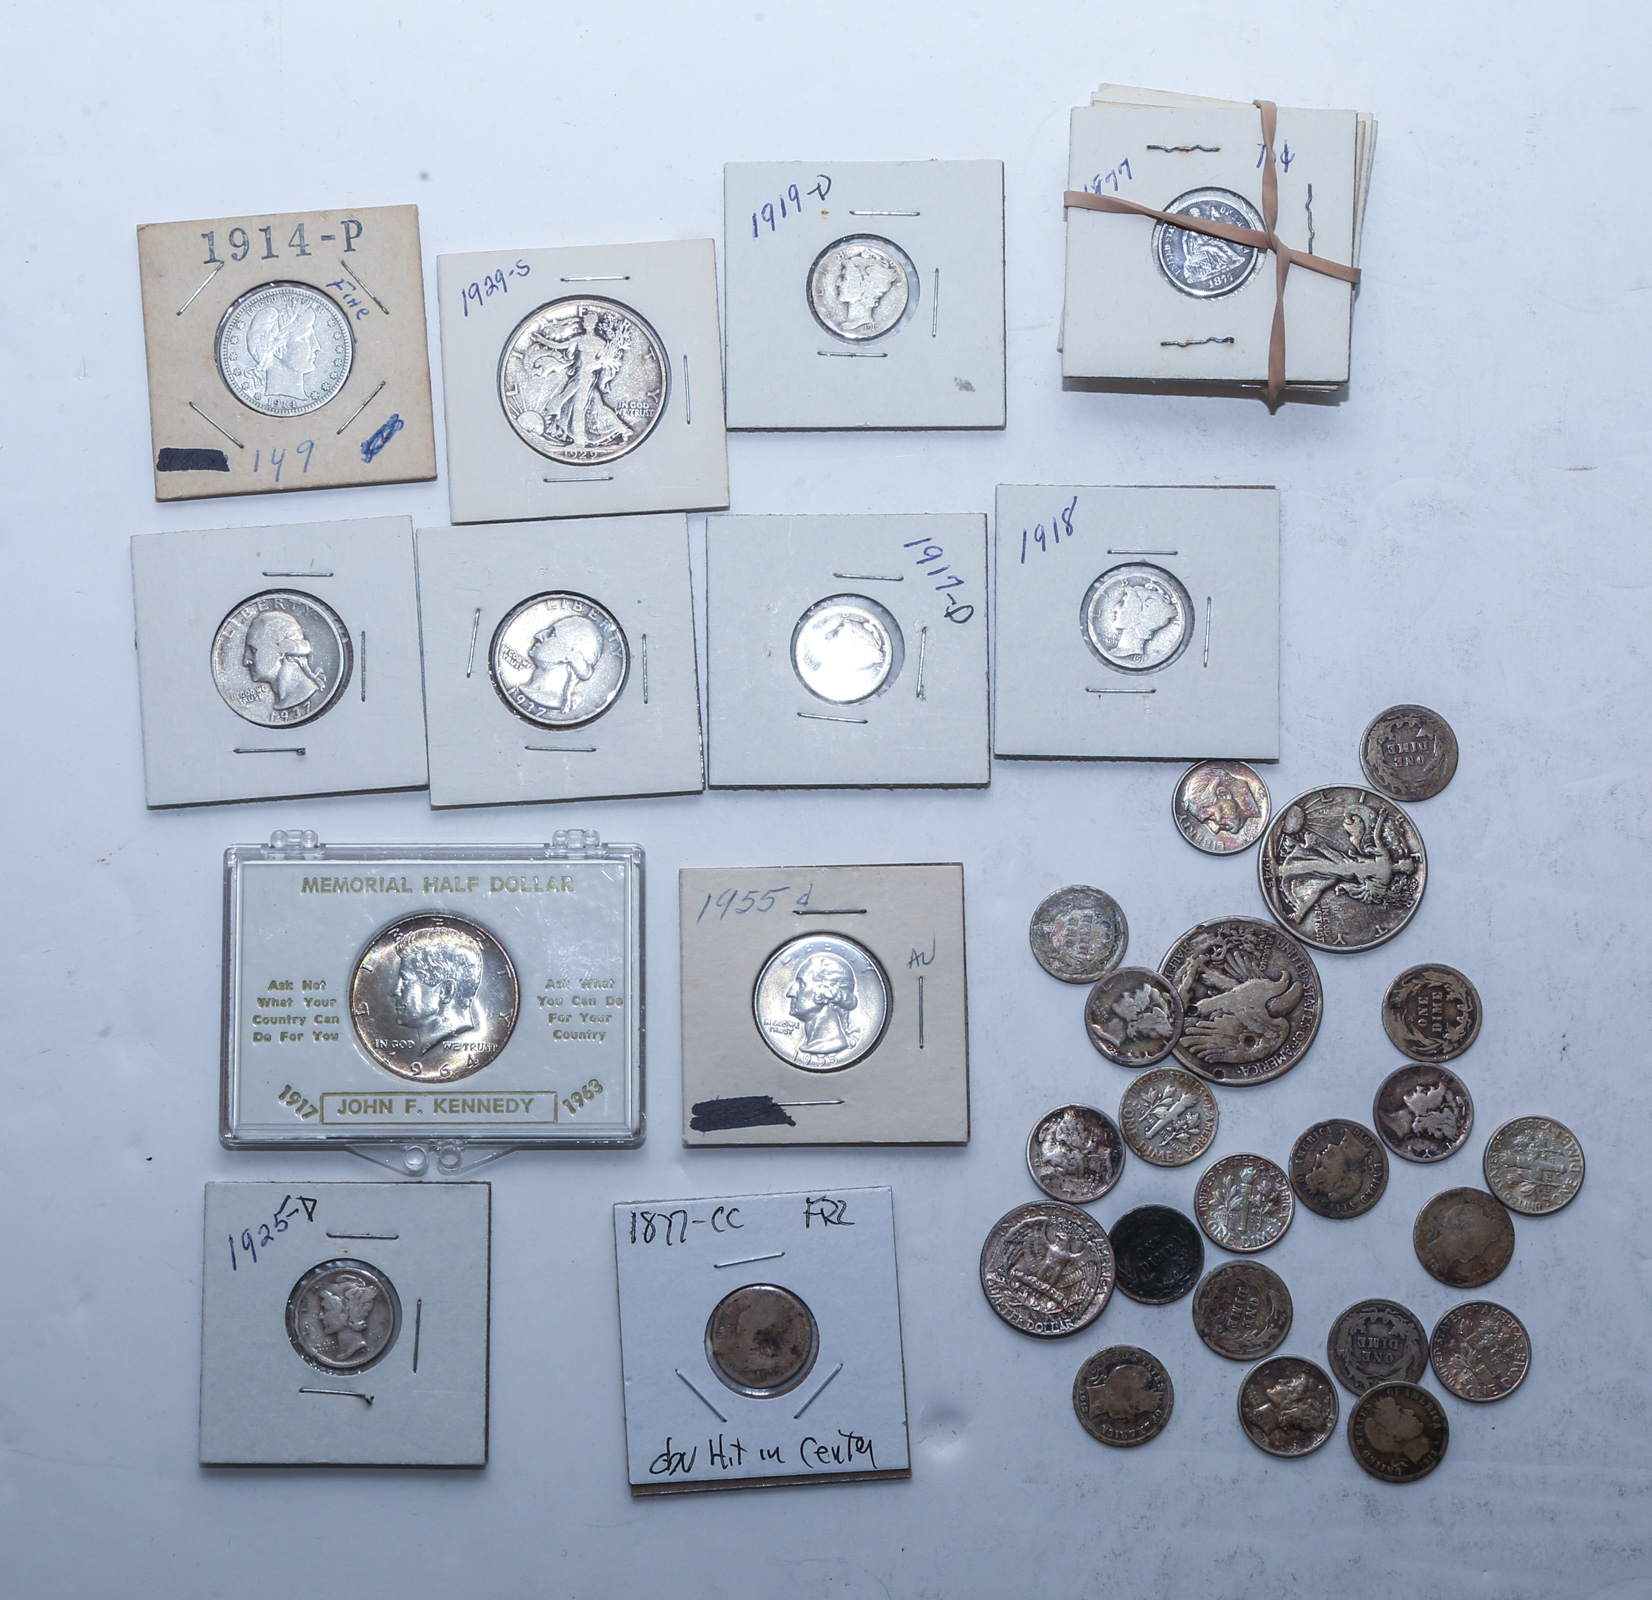 SLIGHTLY BETTER US SILVER COINS 3cb85f